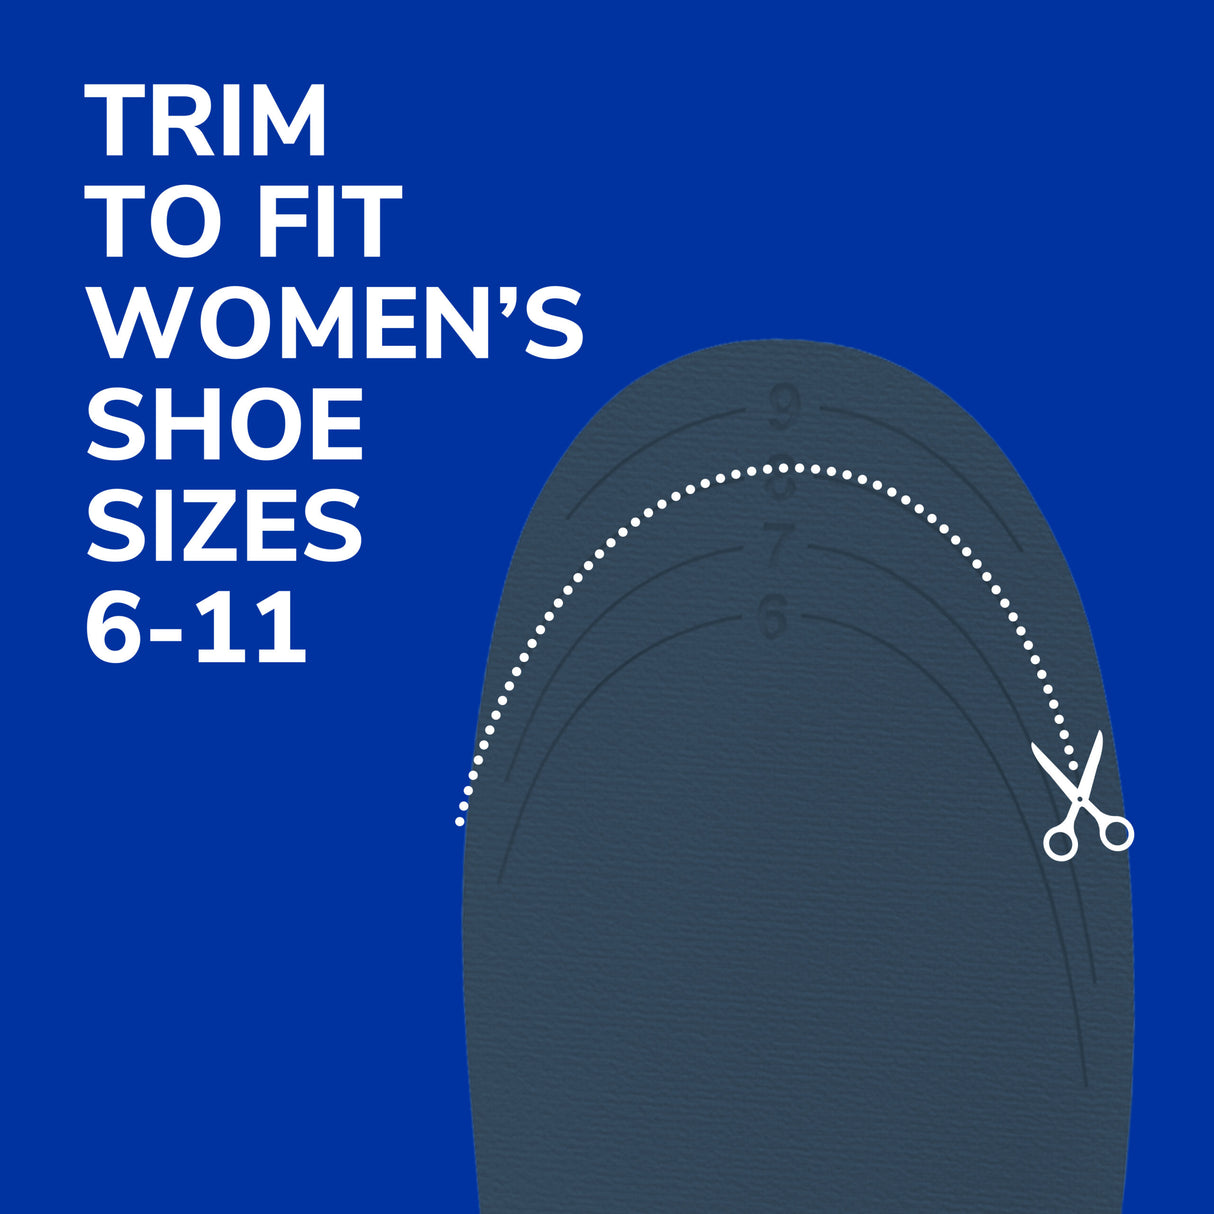 image of trim to fit women's shoe sizes 6-11